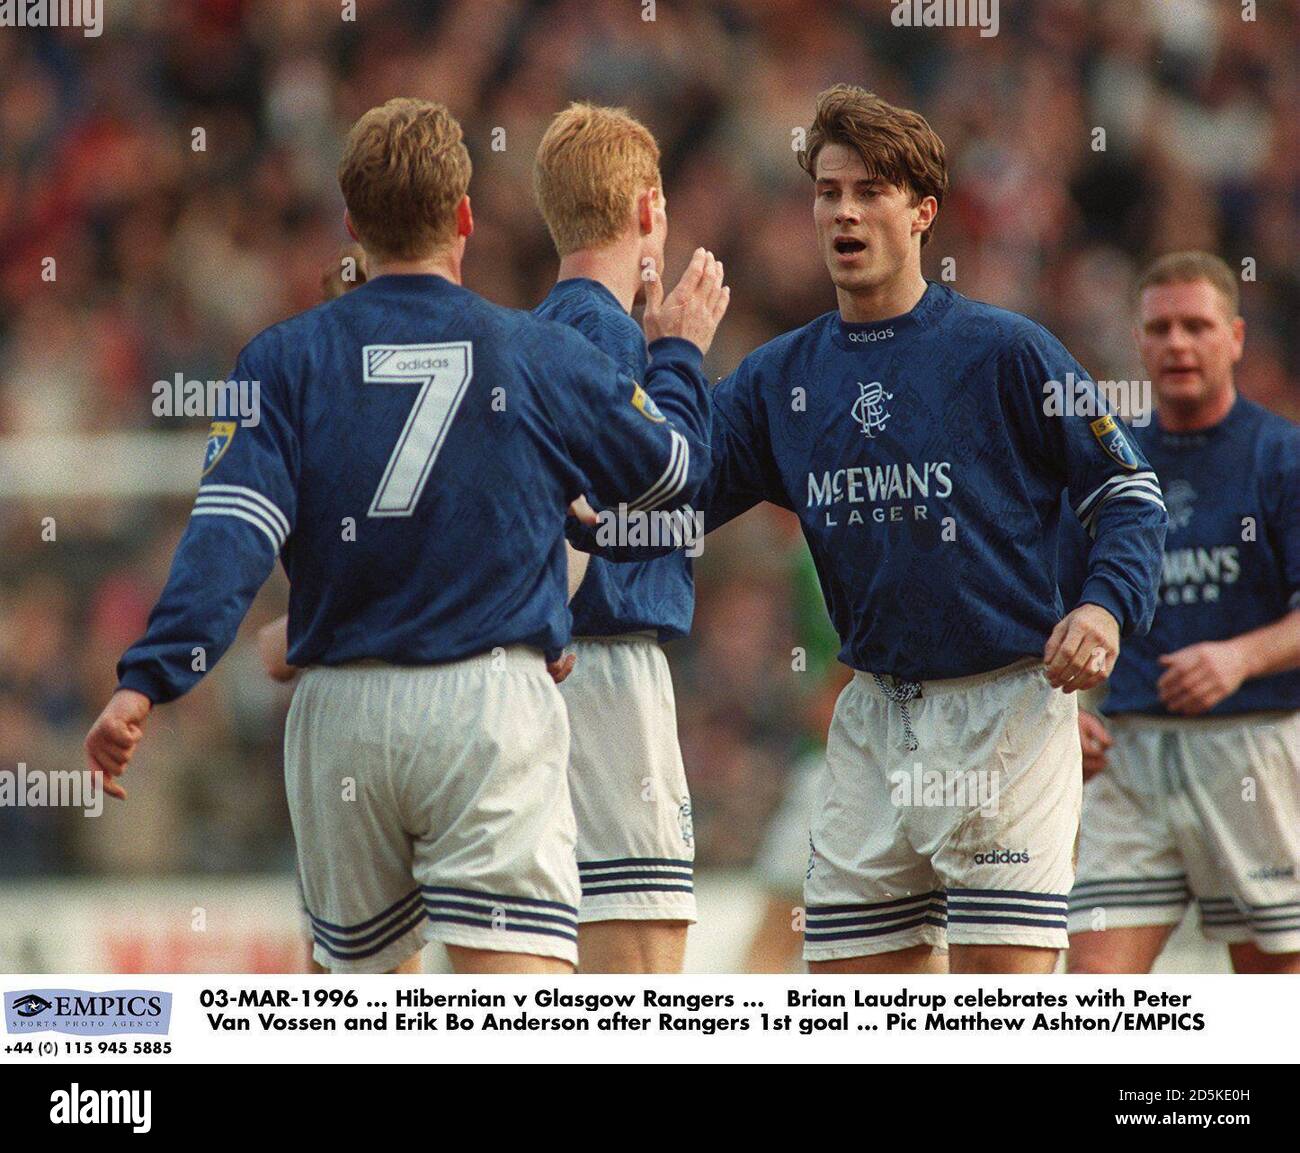 No One Could Stop Brian Laudrup! (1996/97) 